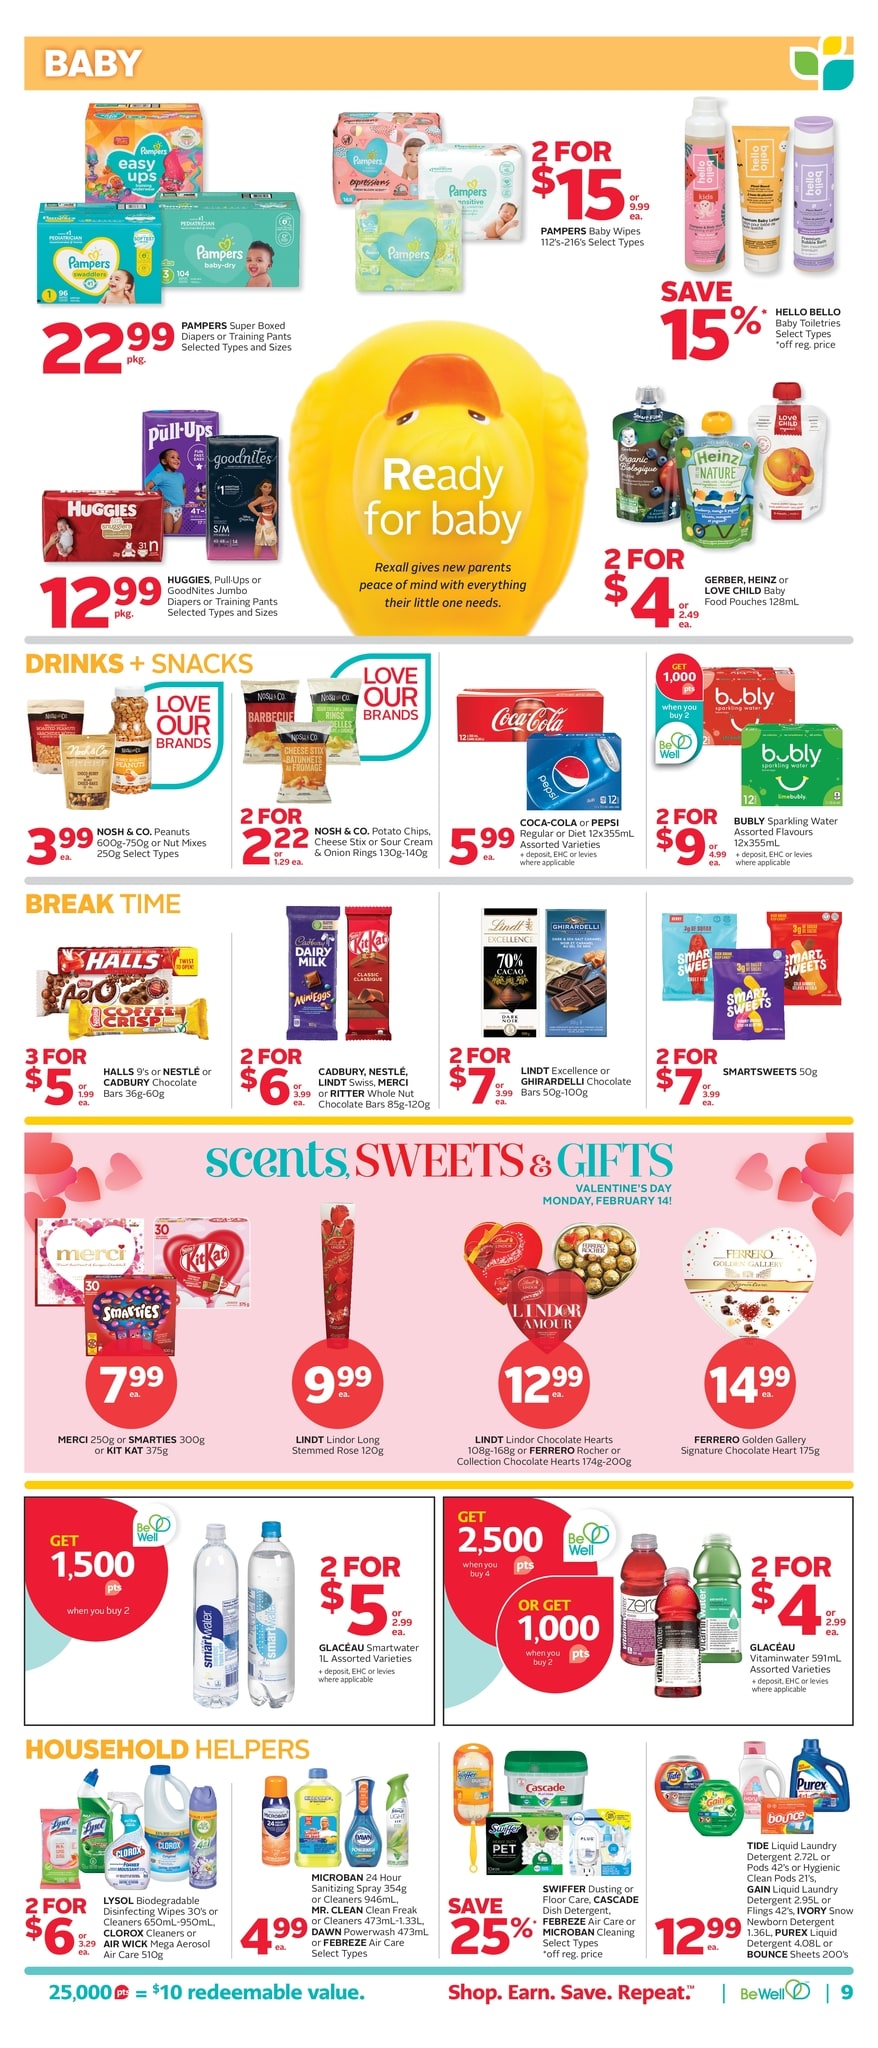 Rexall - Weekly Flyer Specials - Page 10